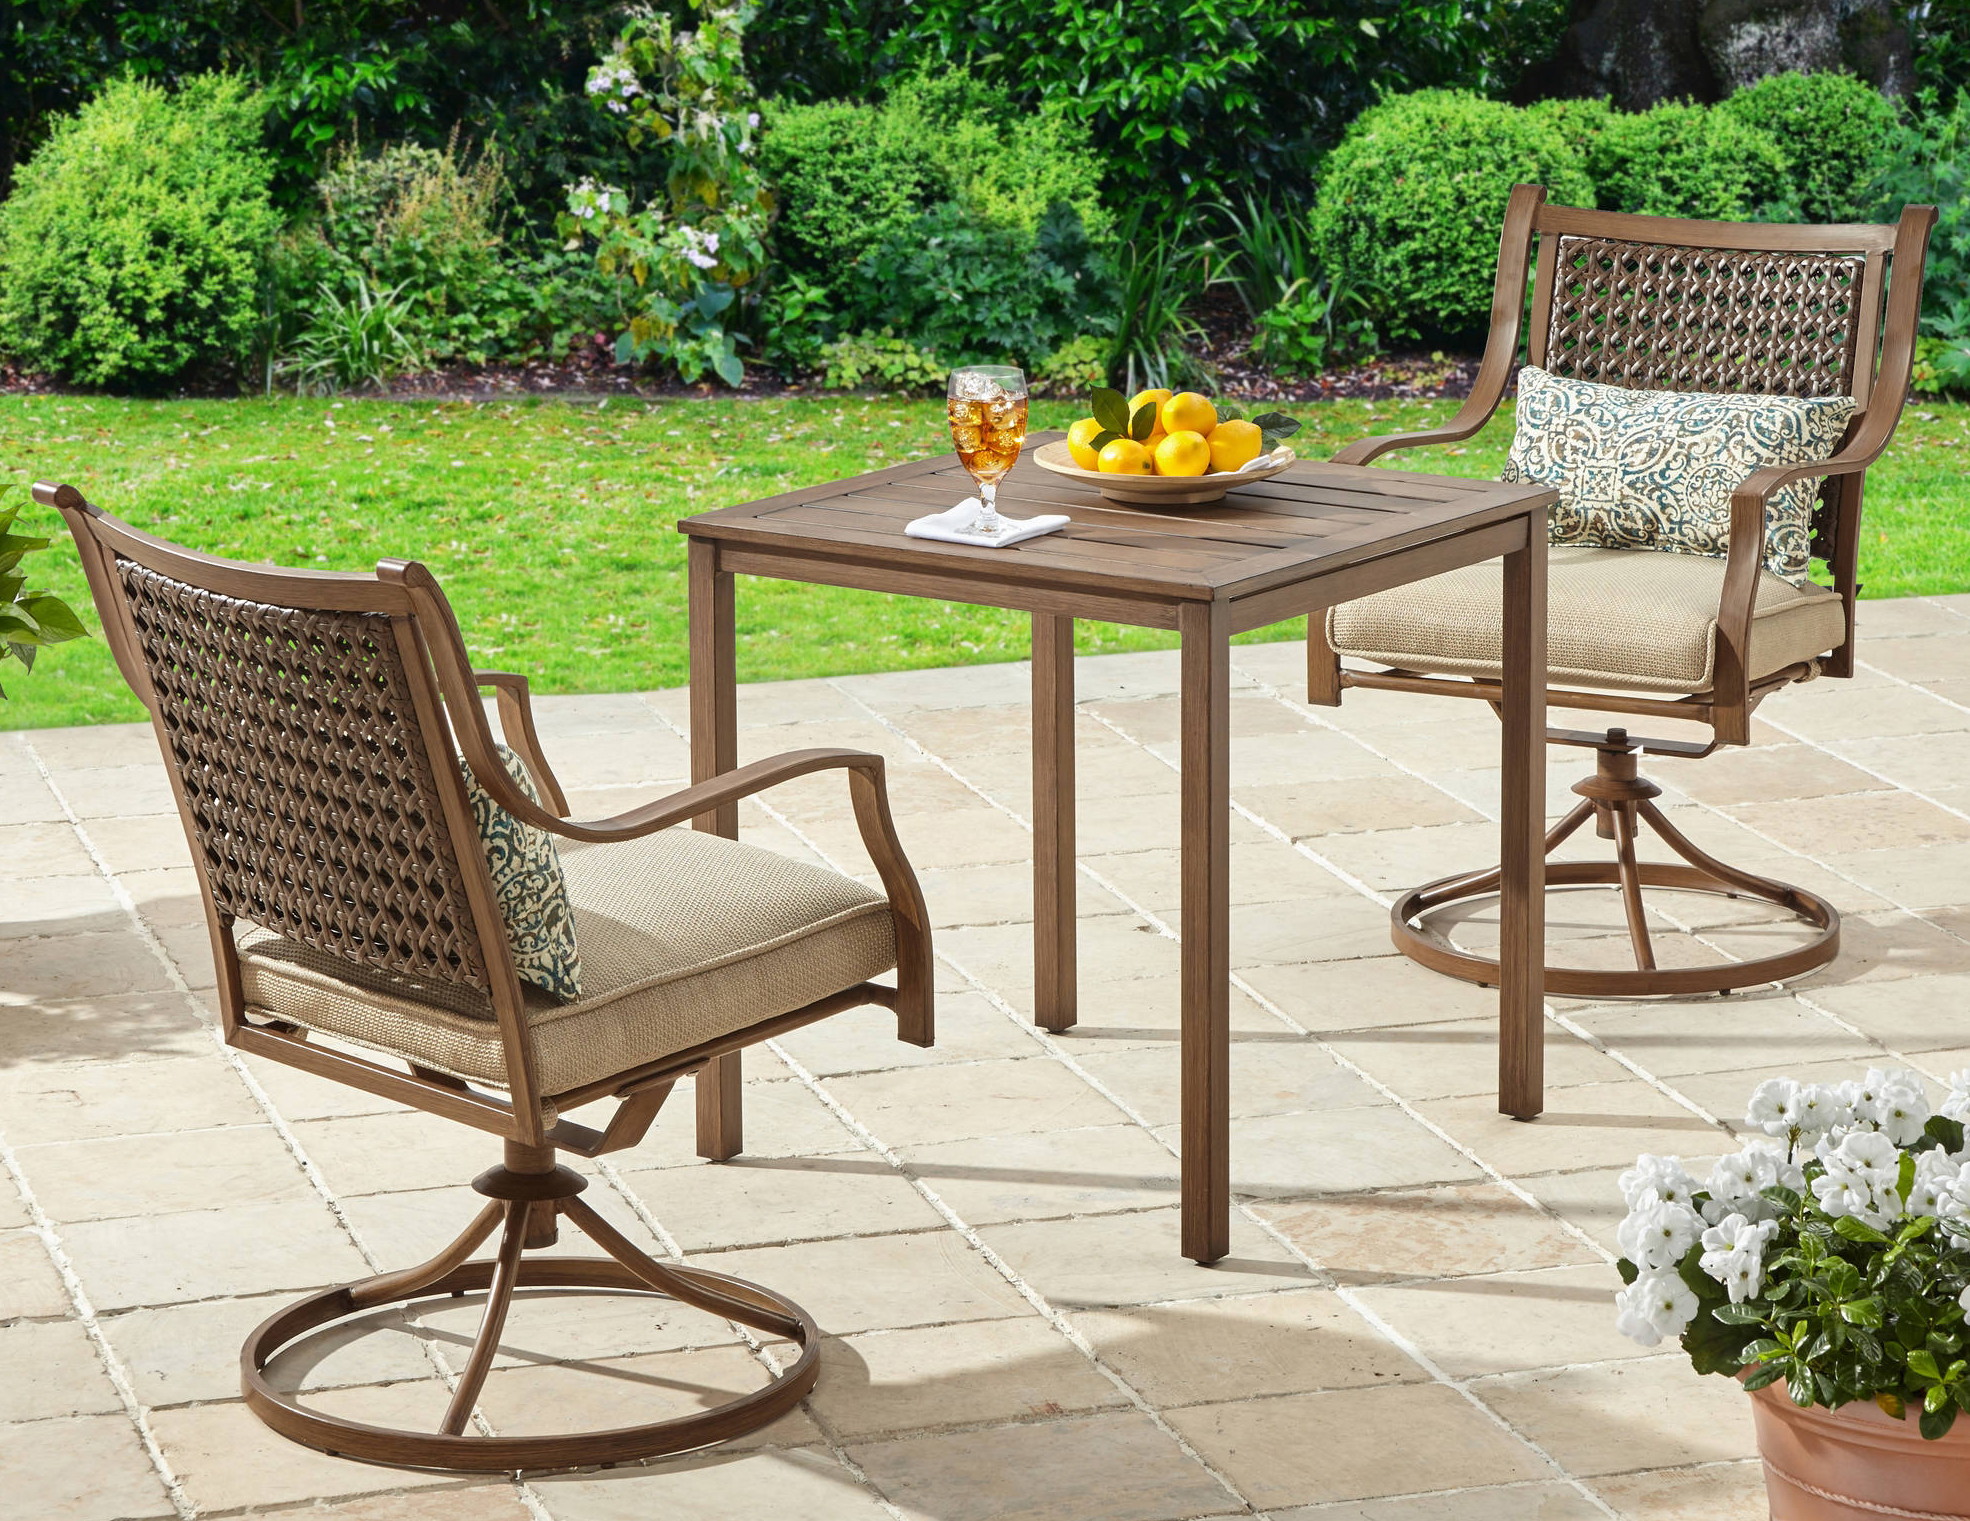 Walmart.com: Outdoor Furniture Clearance - Patio Sets, as Low as $49